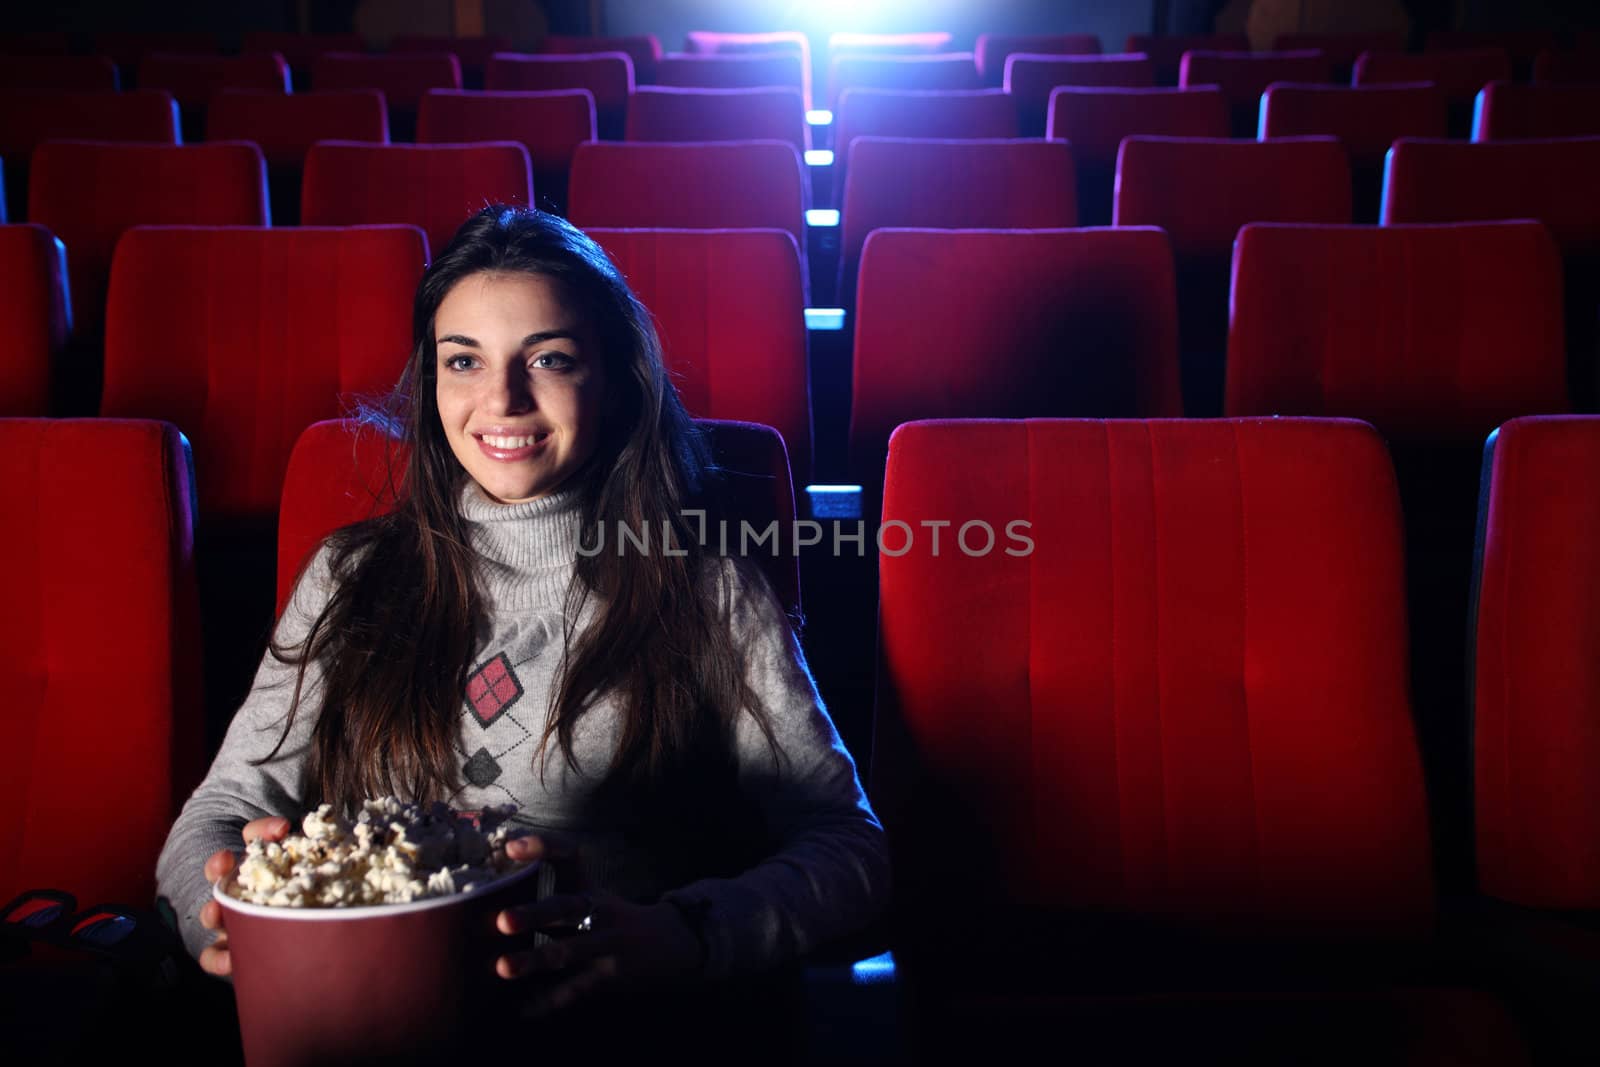 a pretty girl alone sitting in a empty movie theater, she eats popcorn and smiles